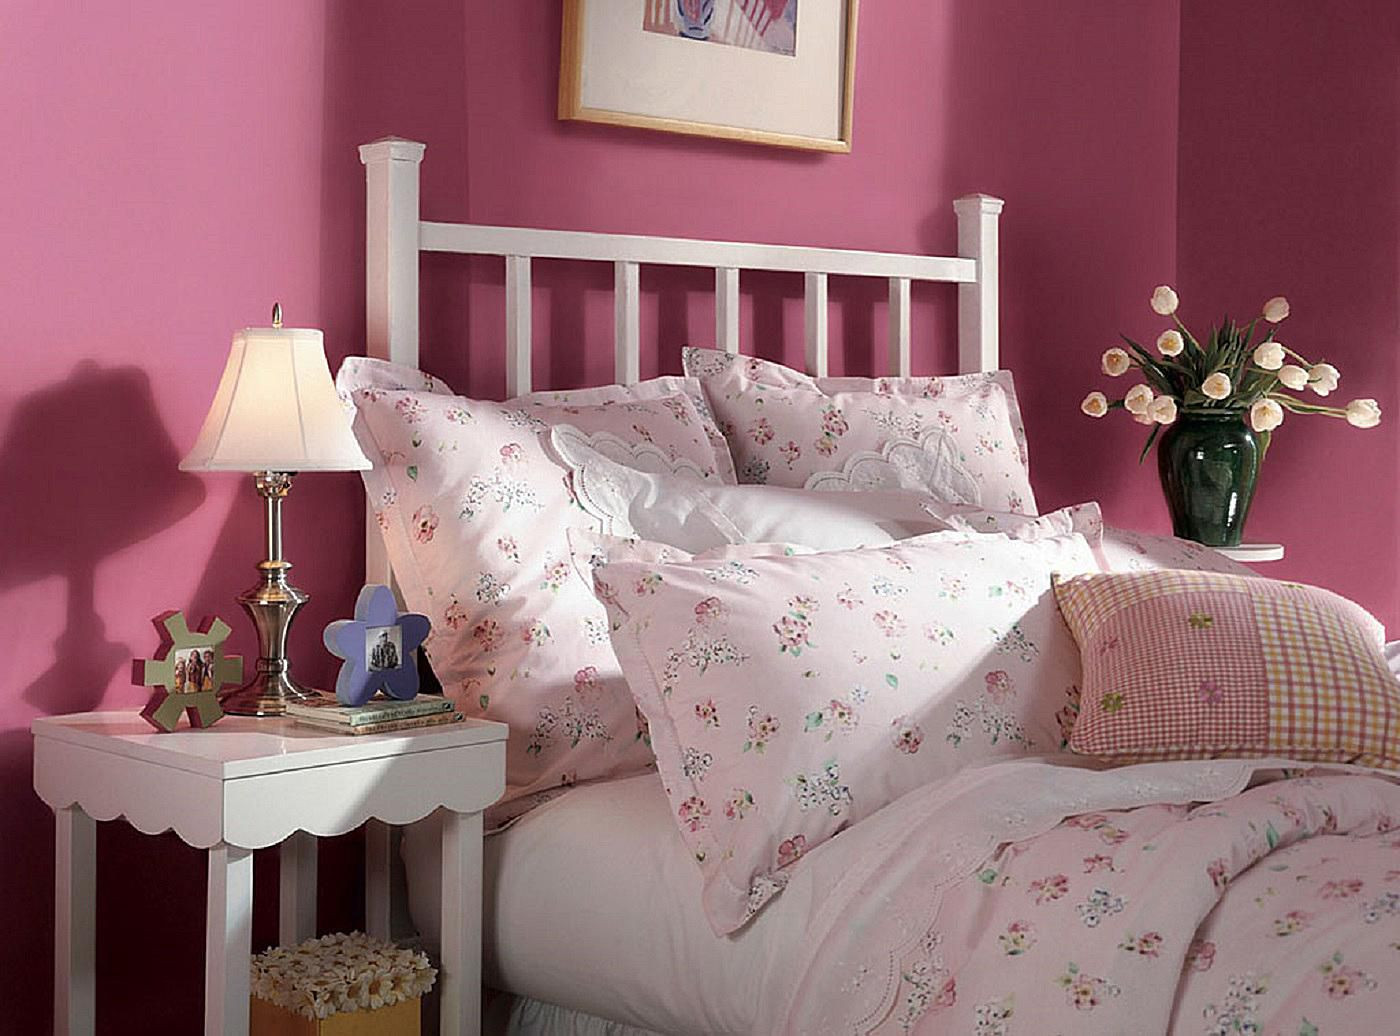 Purple Paint Color For Bedroom
 10 Great Pink and Purple Paint Colors for the Bedroom